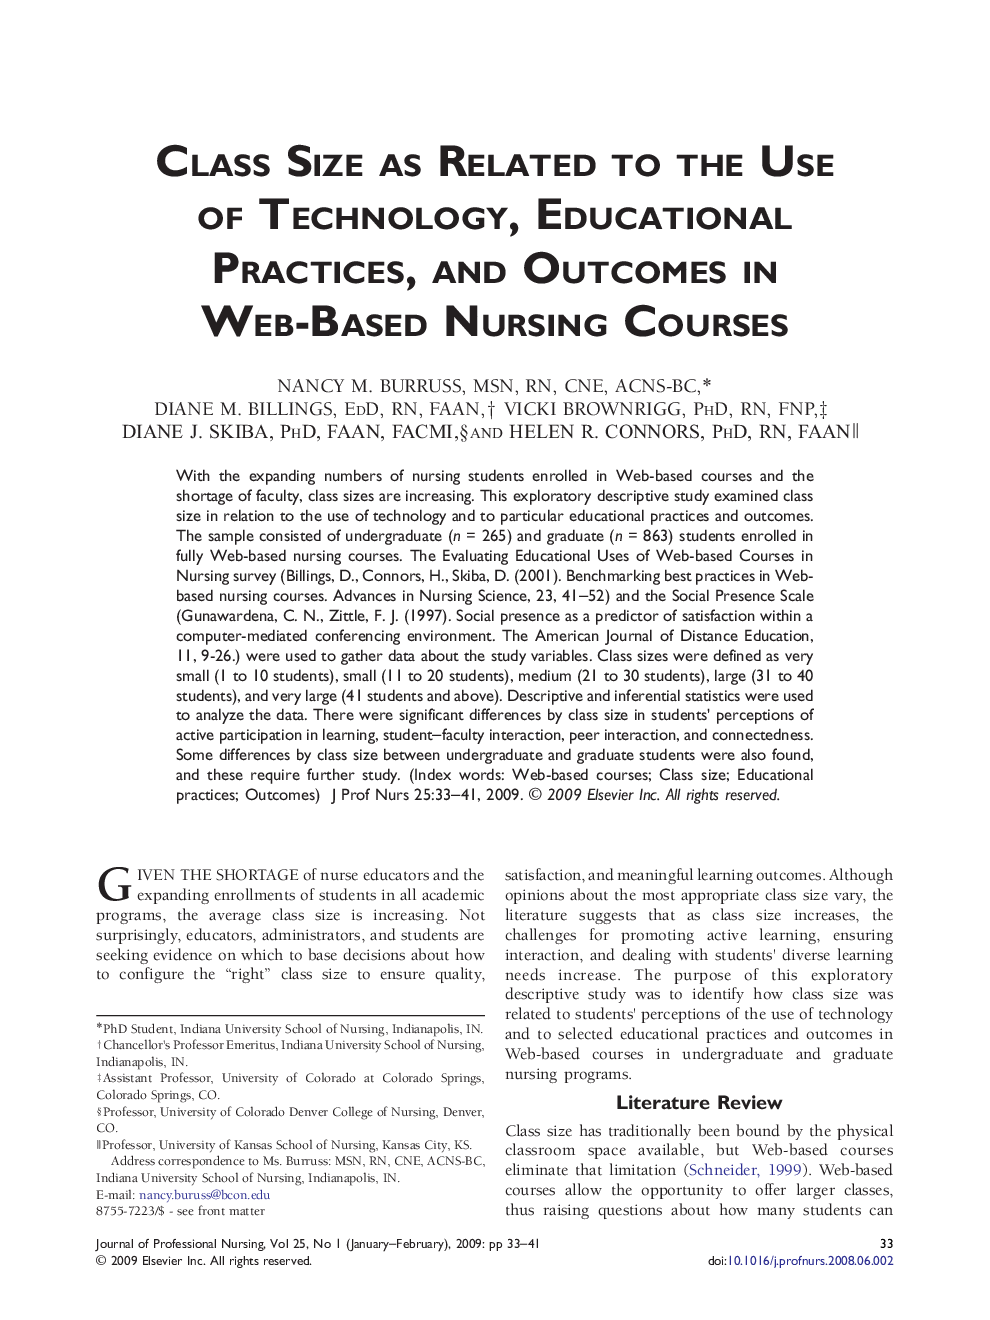 Class Size as Related to the Use of Technology, Educational Practices, and Outcomes in Web-Based Nursing Courses